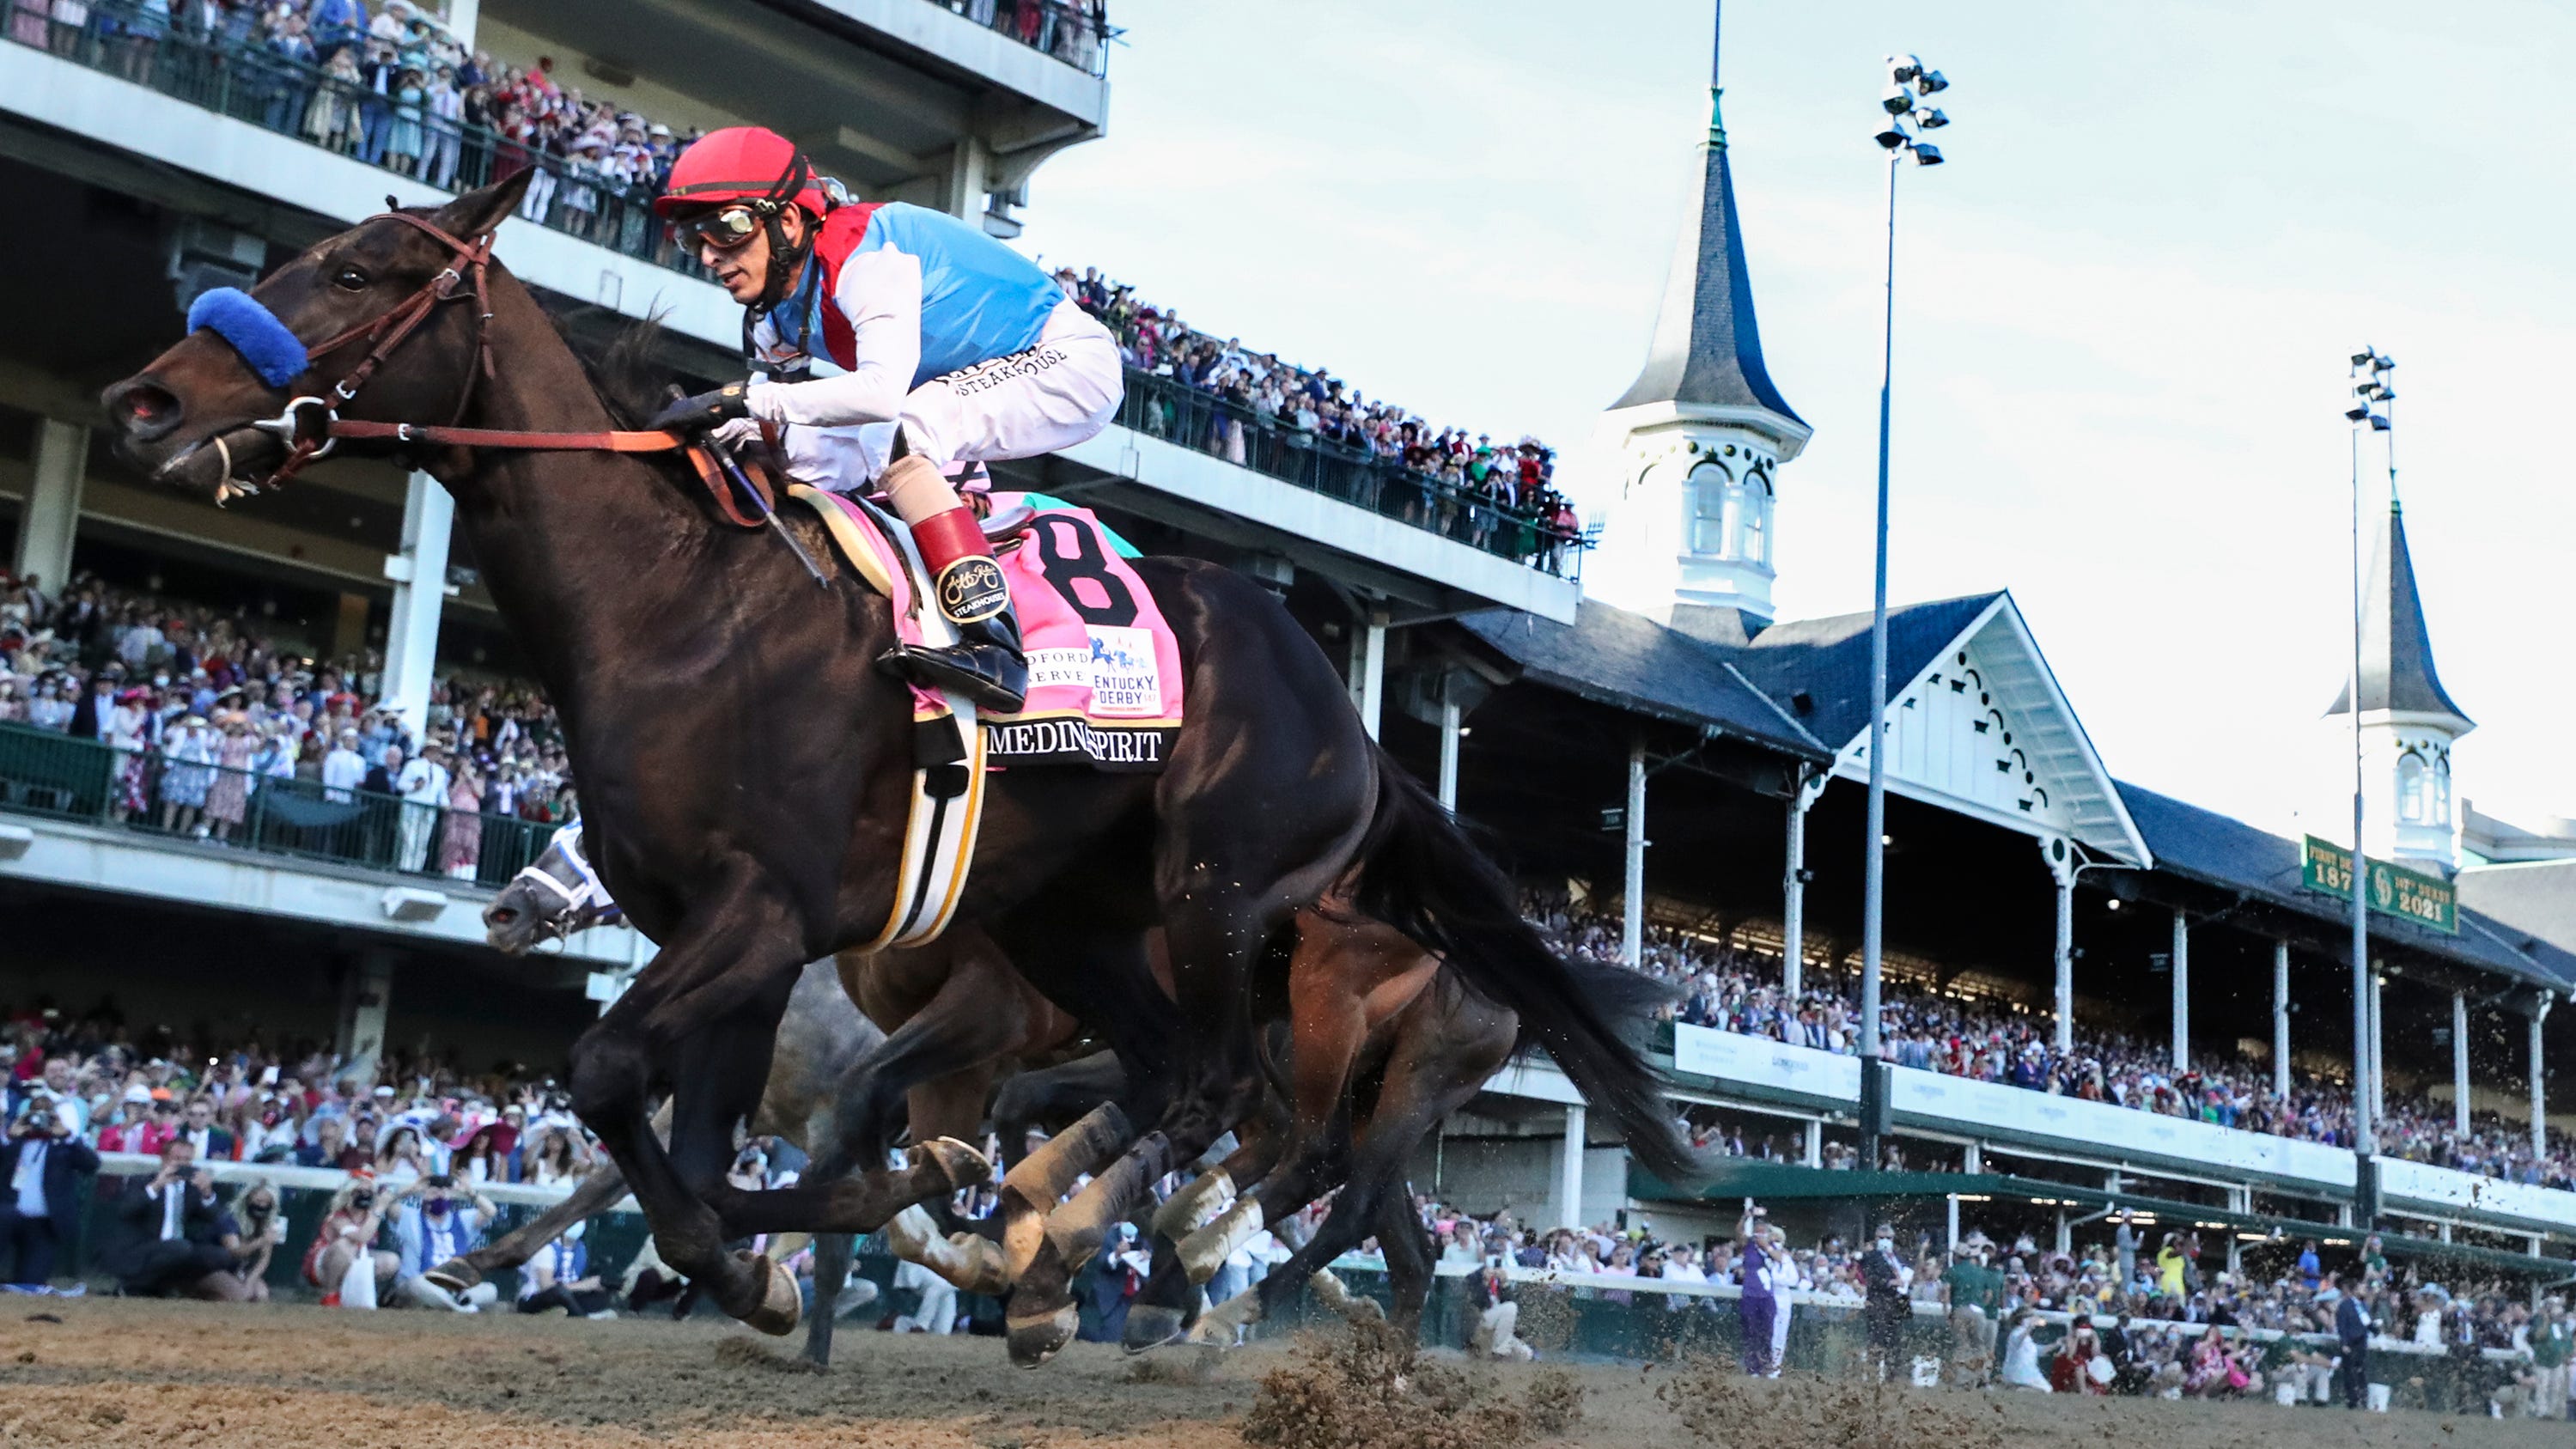 What horses are possible contenders for the 2021 Preakness Stakes?